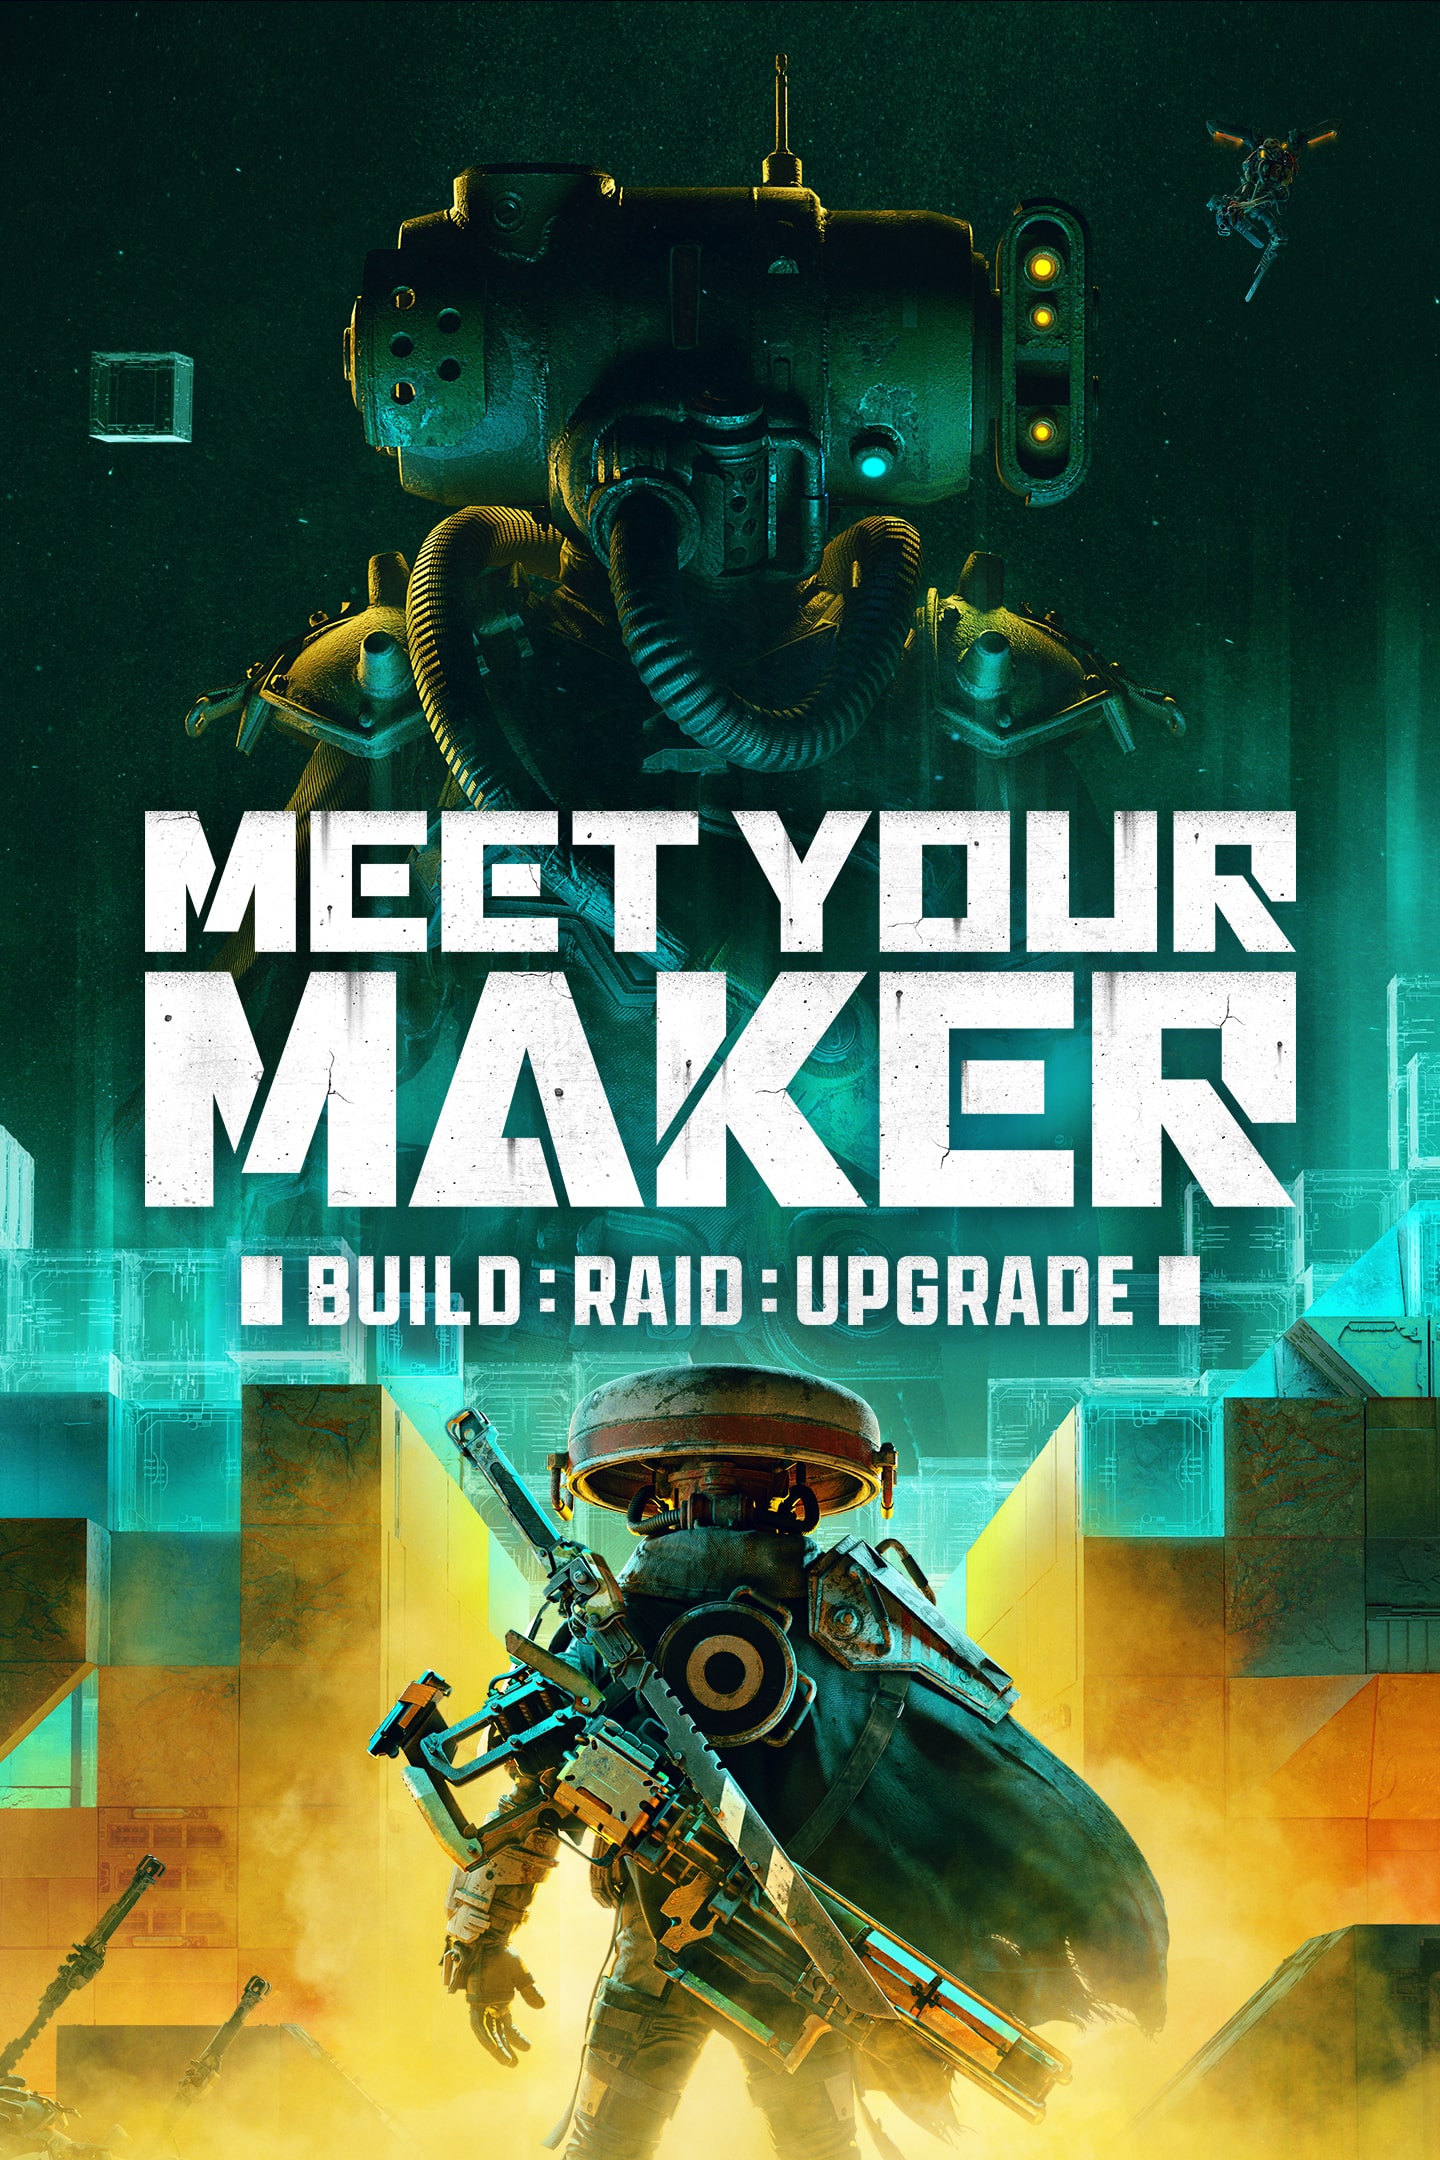 Meet Your Maker will be the PlayStation Plus Monthly Game for